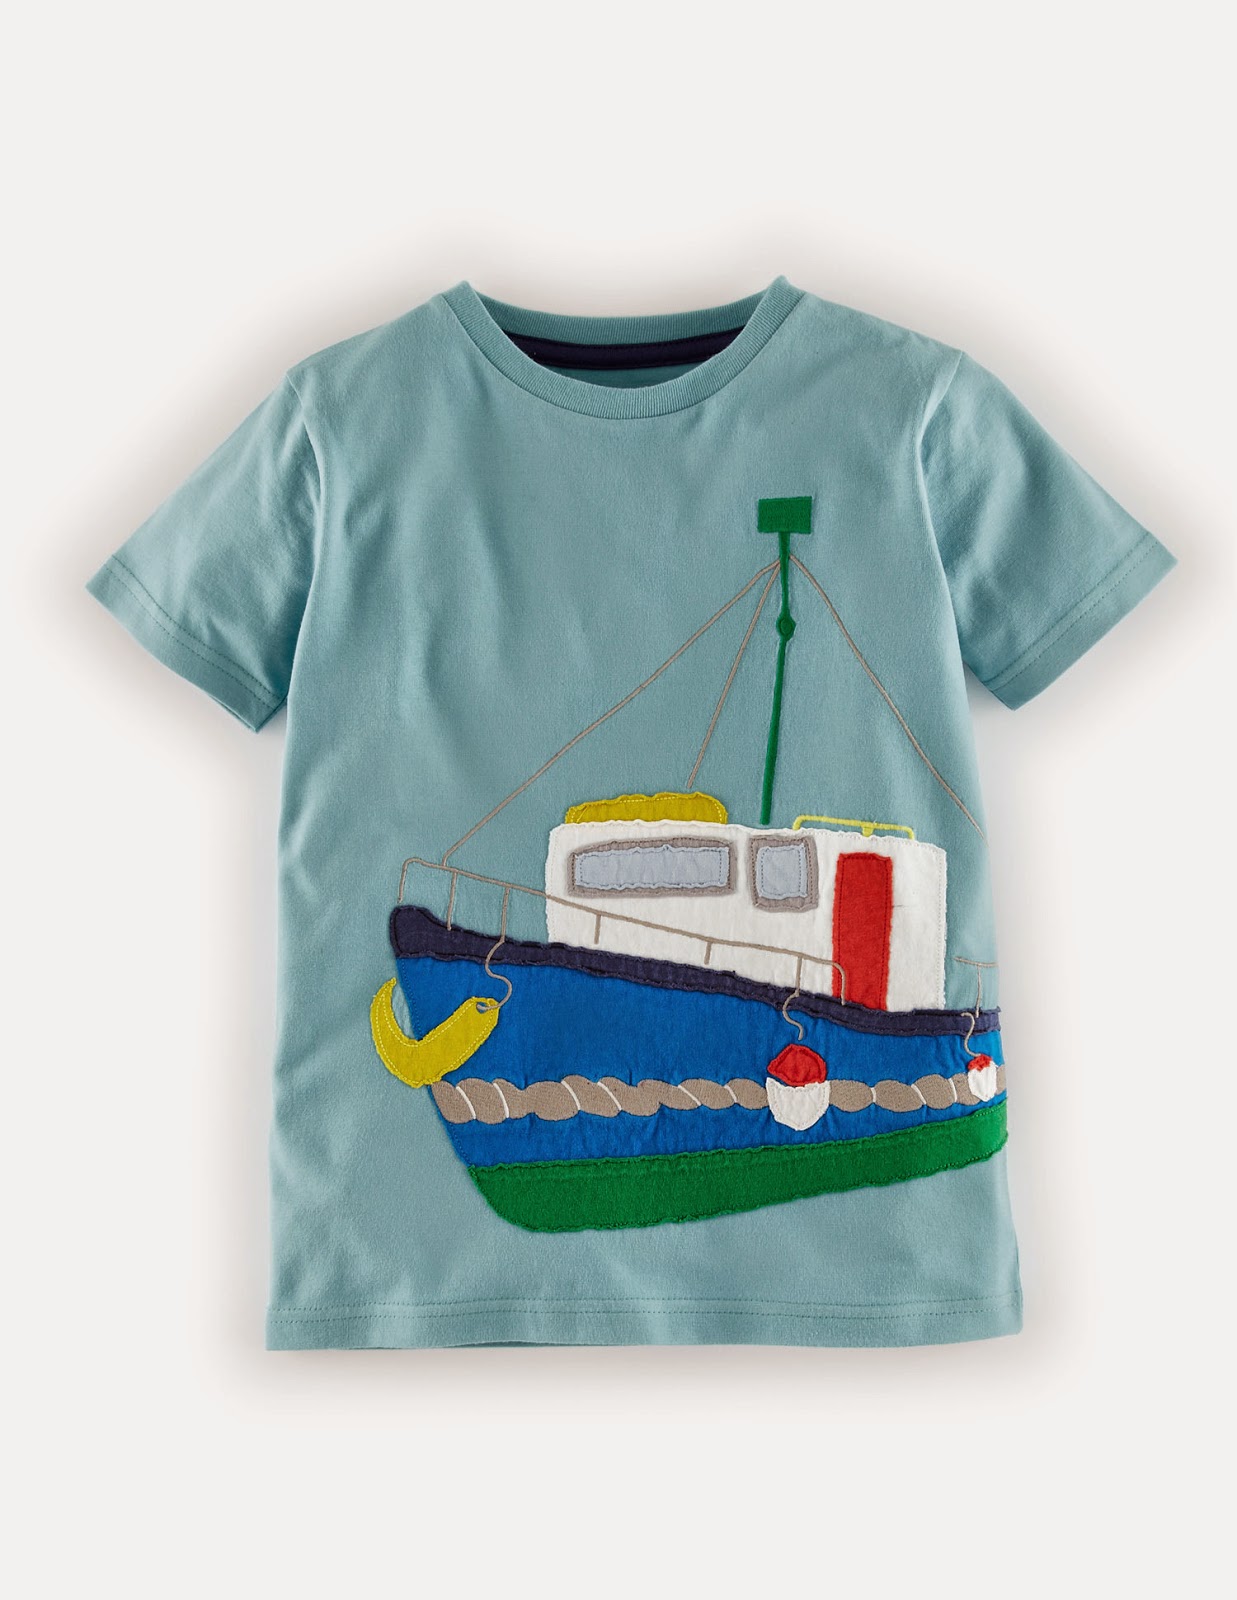 Boden Nautical New Arrivals Spring 2015